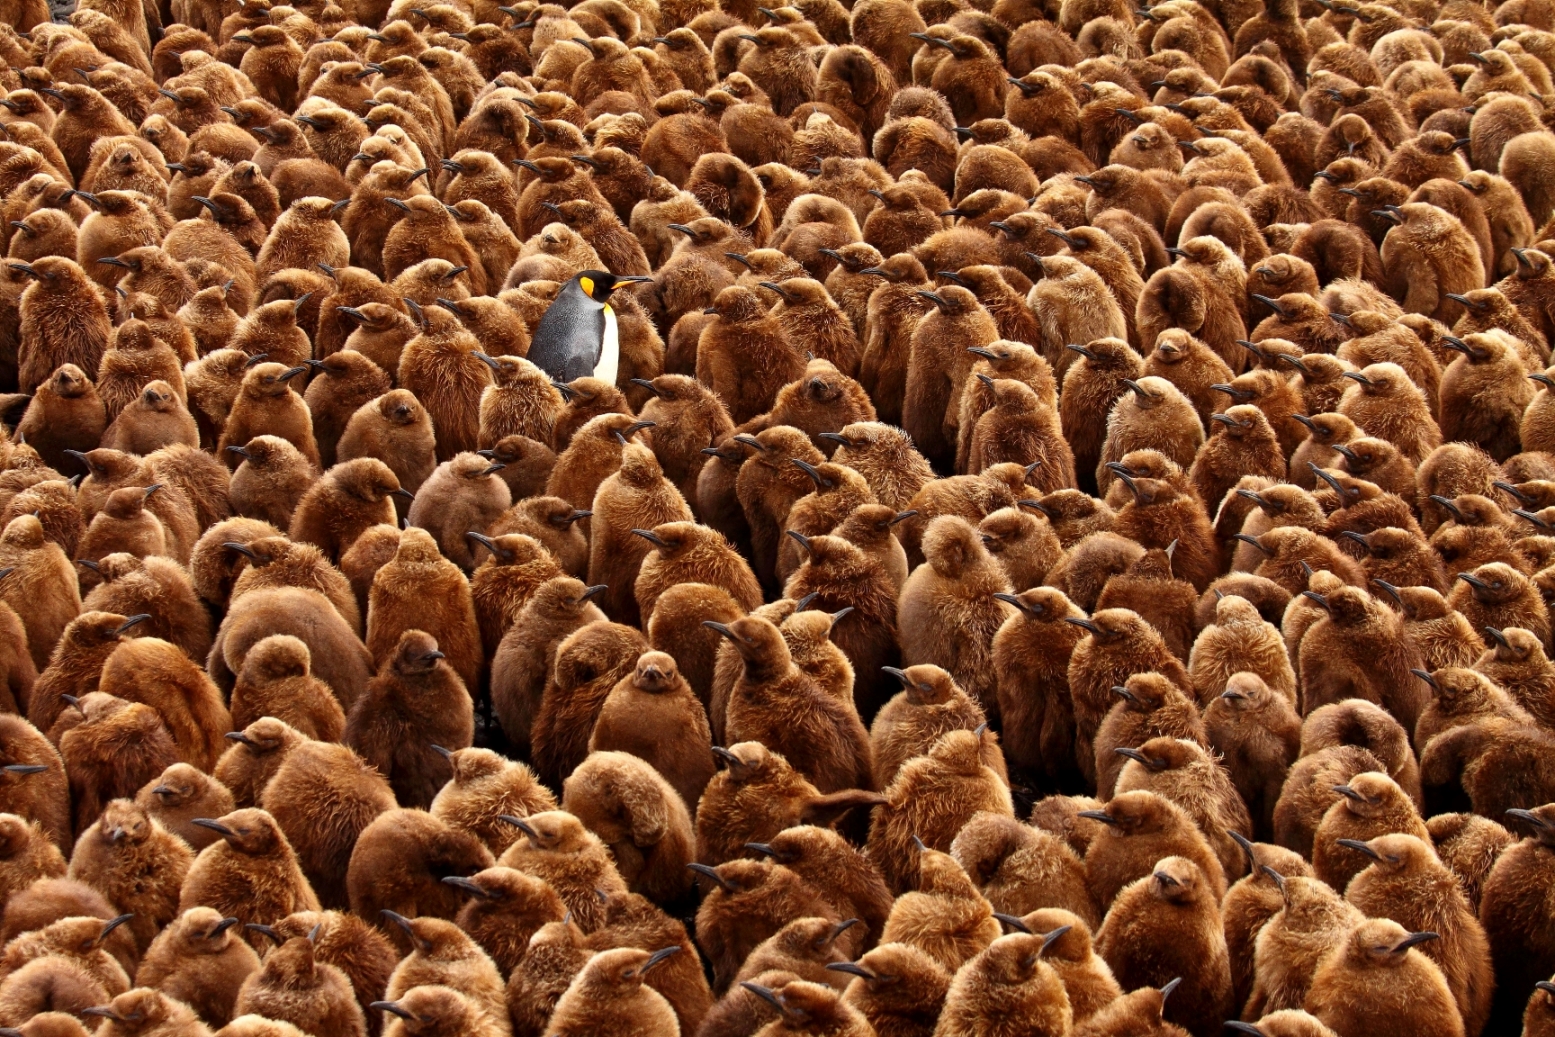 Image: Chris Oosthuizen "Stand out from the crowd"